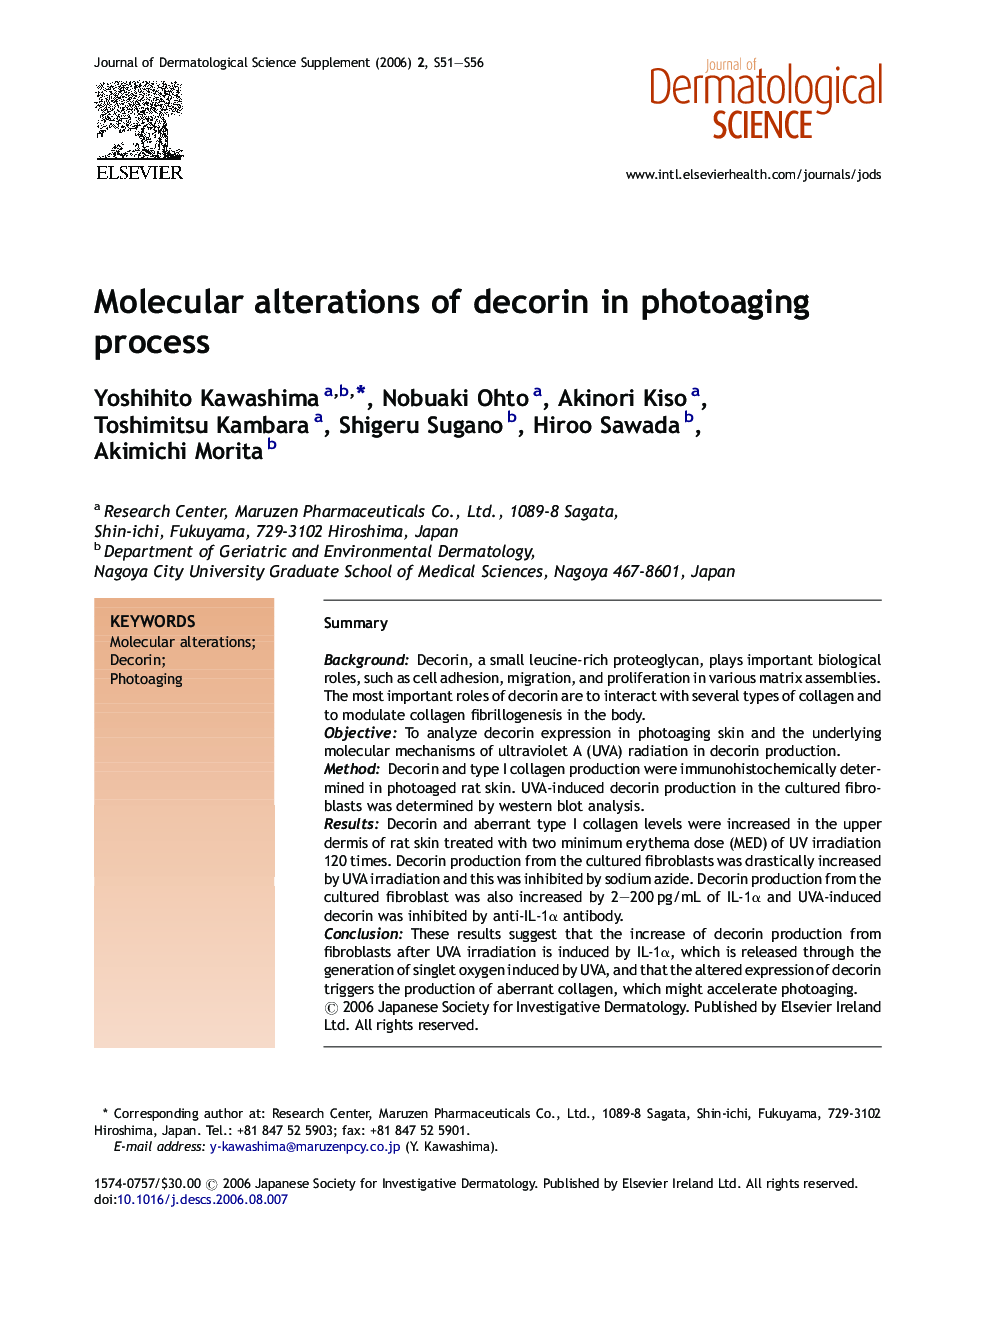 Molecular alterations of decorin in photoaging process